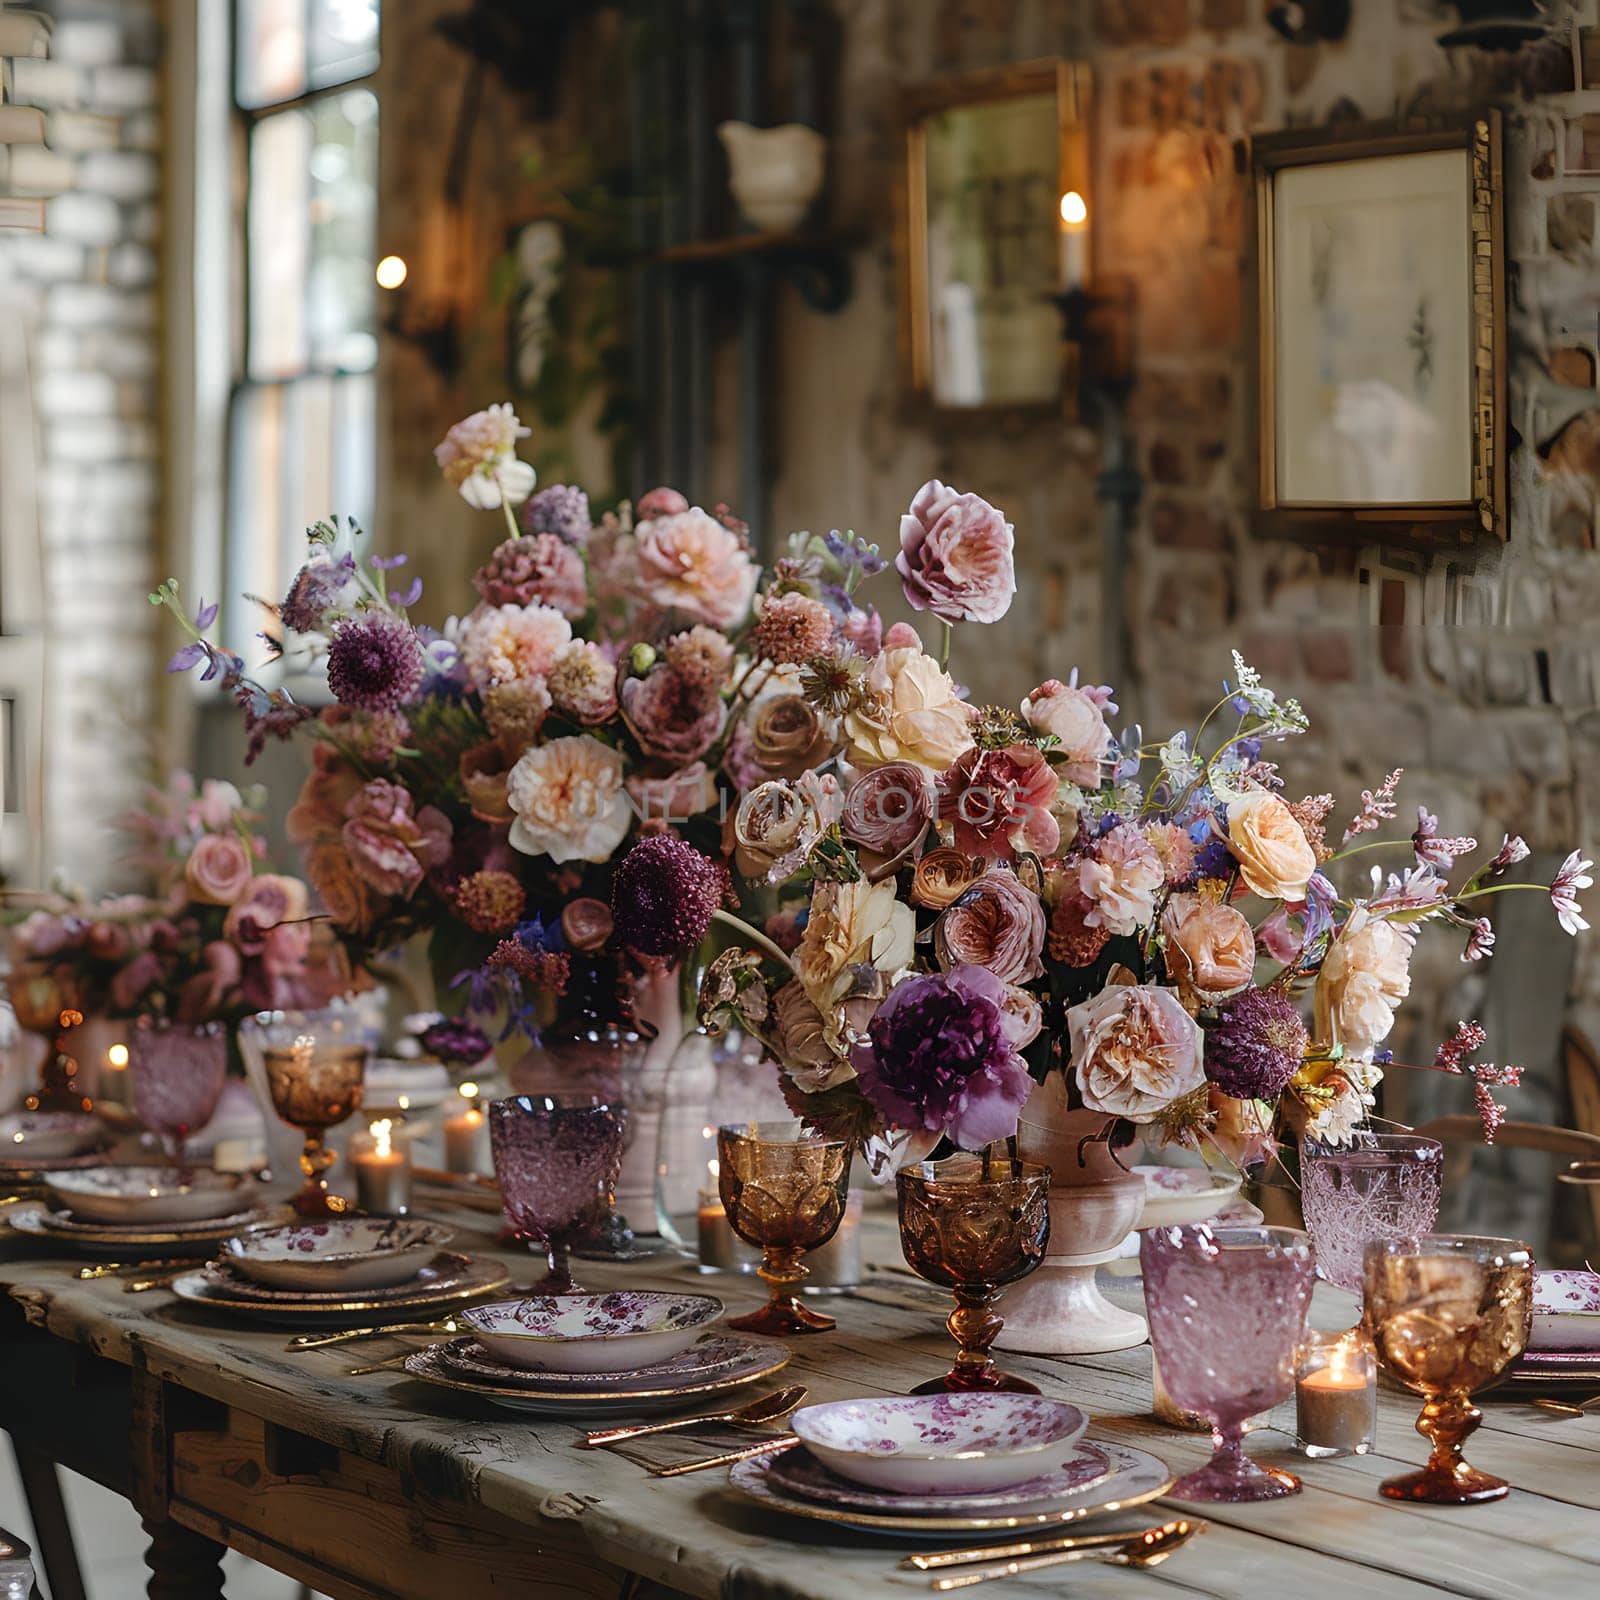 Table set with purple vases of flowers, glasses, and plates by Nadtochiy